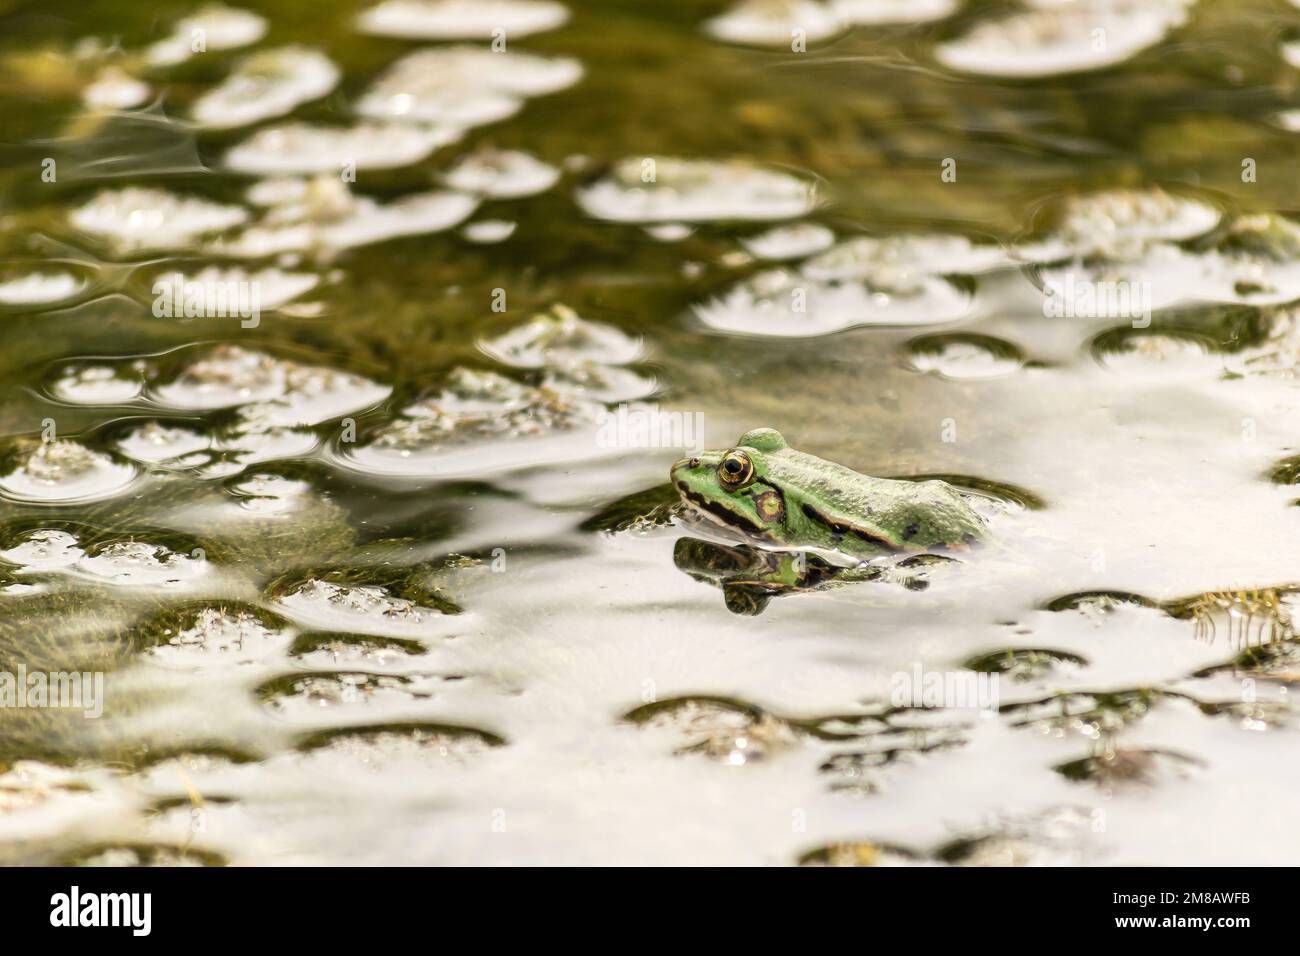 Green lily leaves float in the blue clear water of the pond. Stock Photo